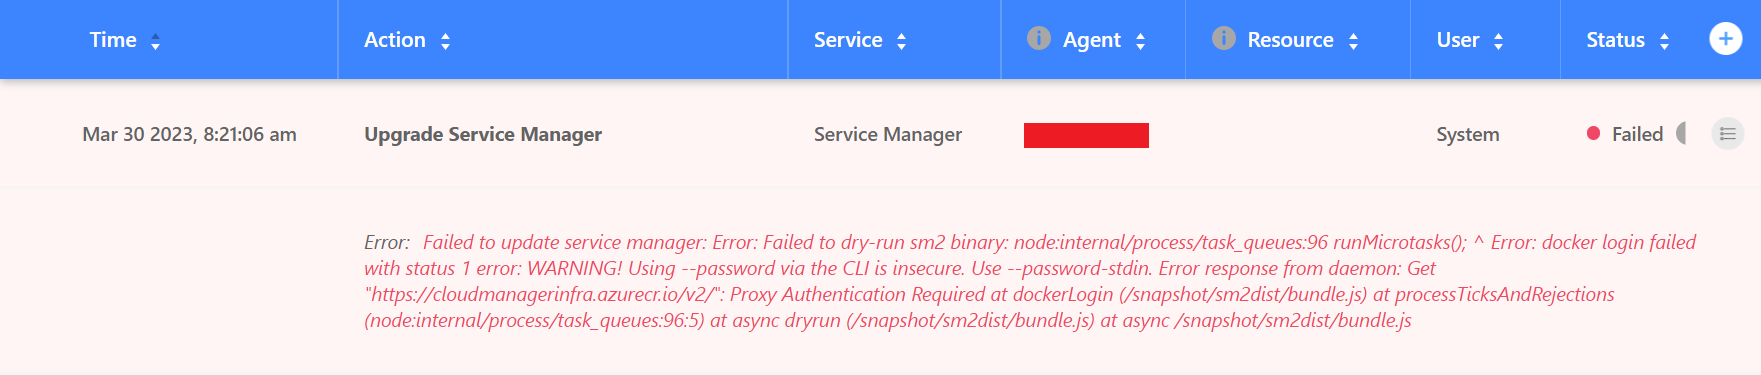 Alerts in BlueXP-Failed to Upgrade Service Manager